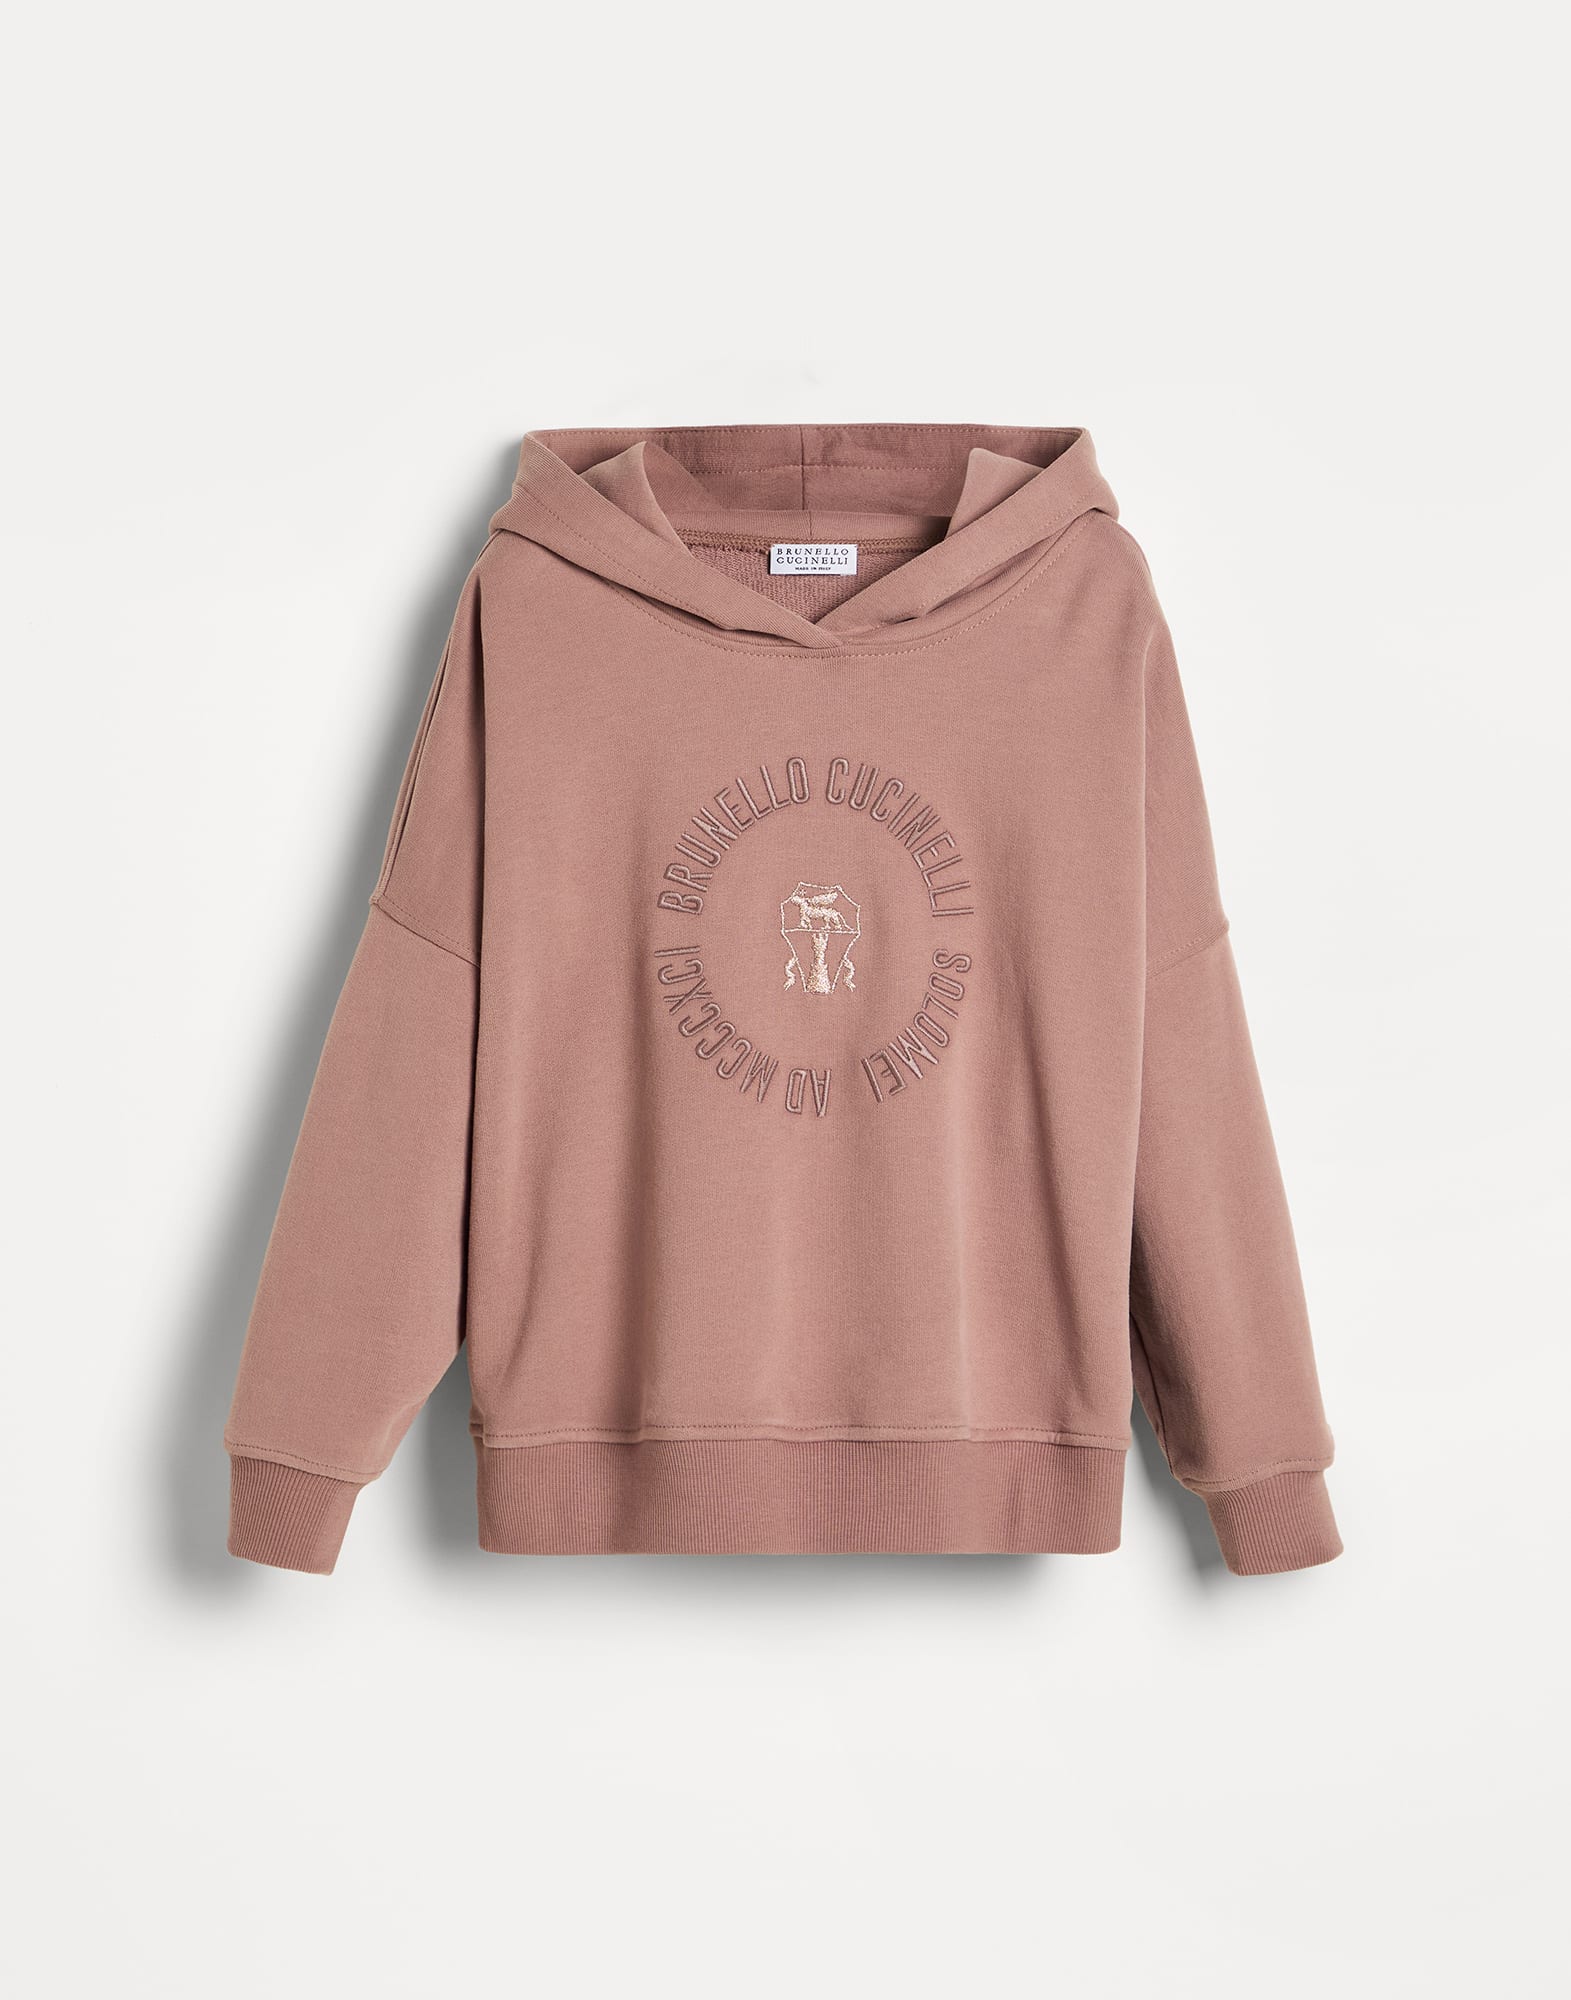 Smooth cotton French terry sweatshirt